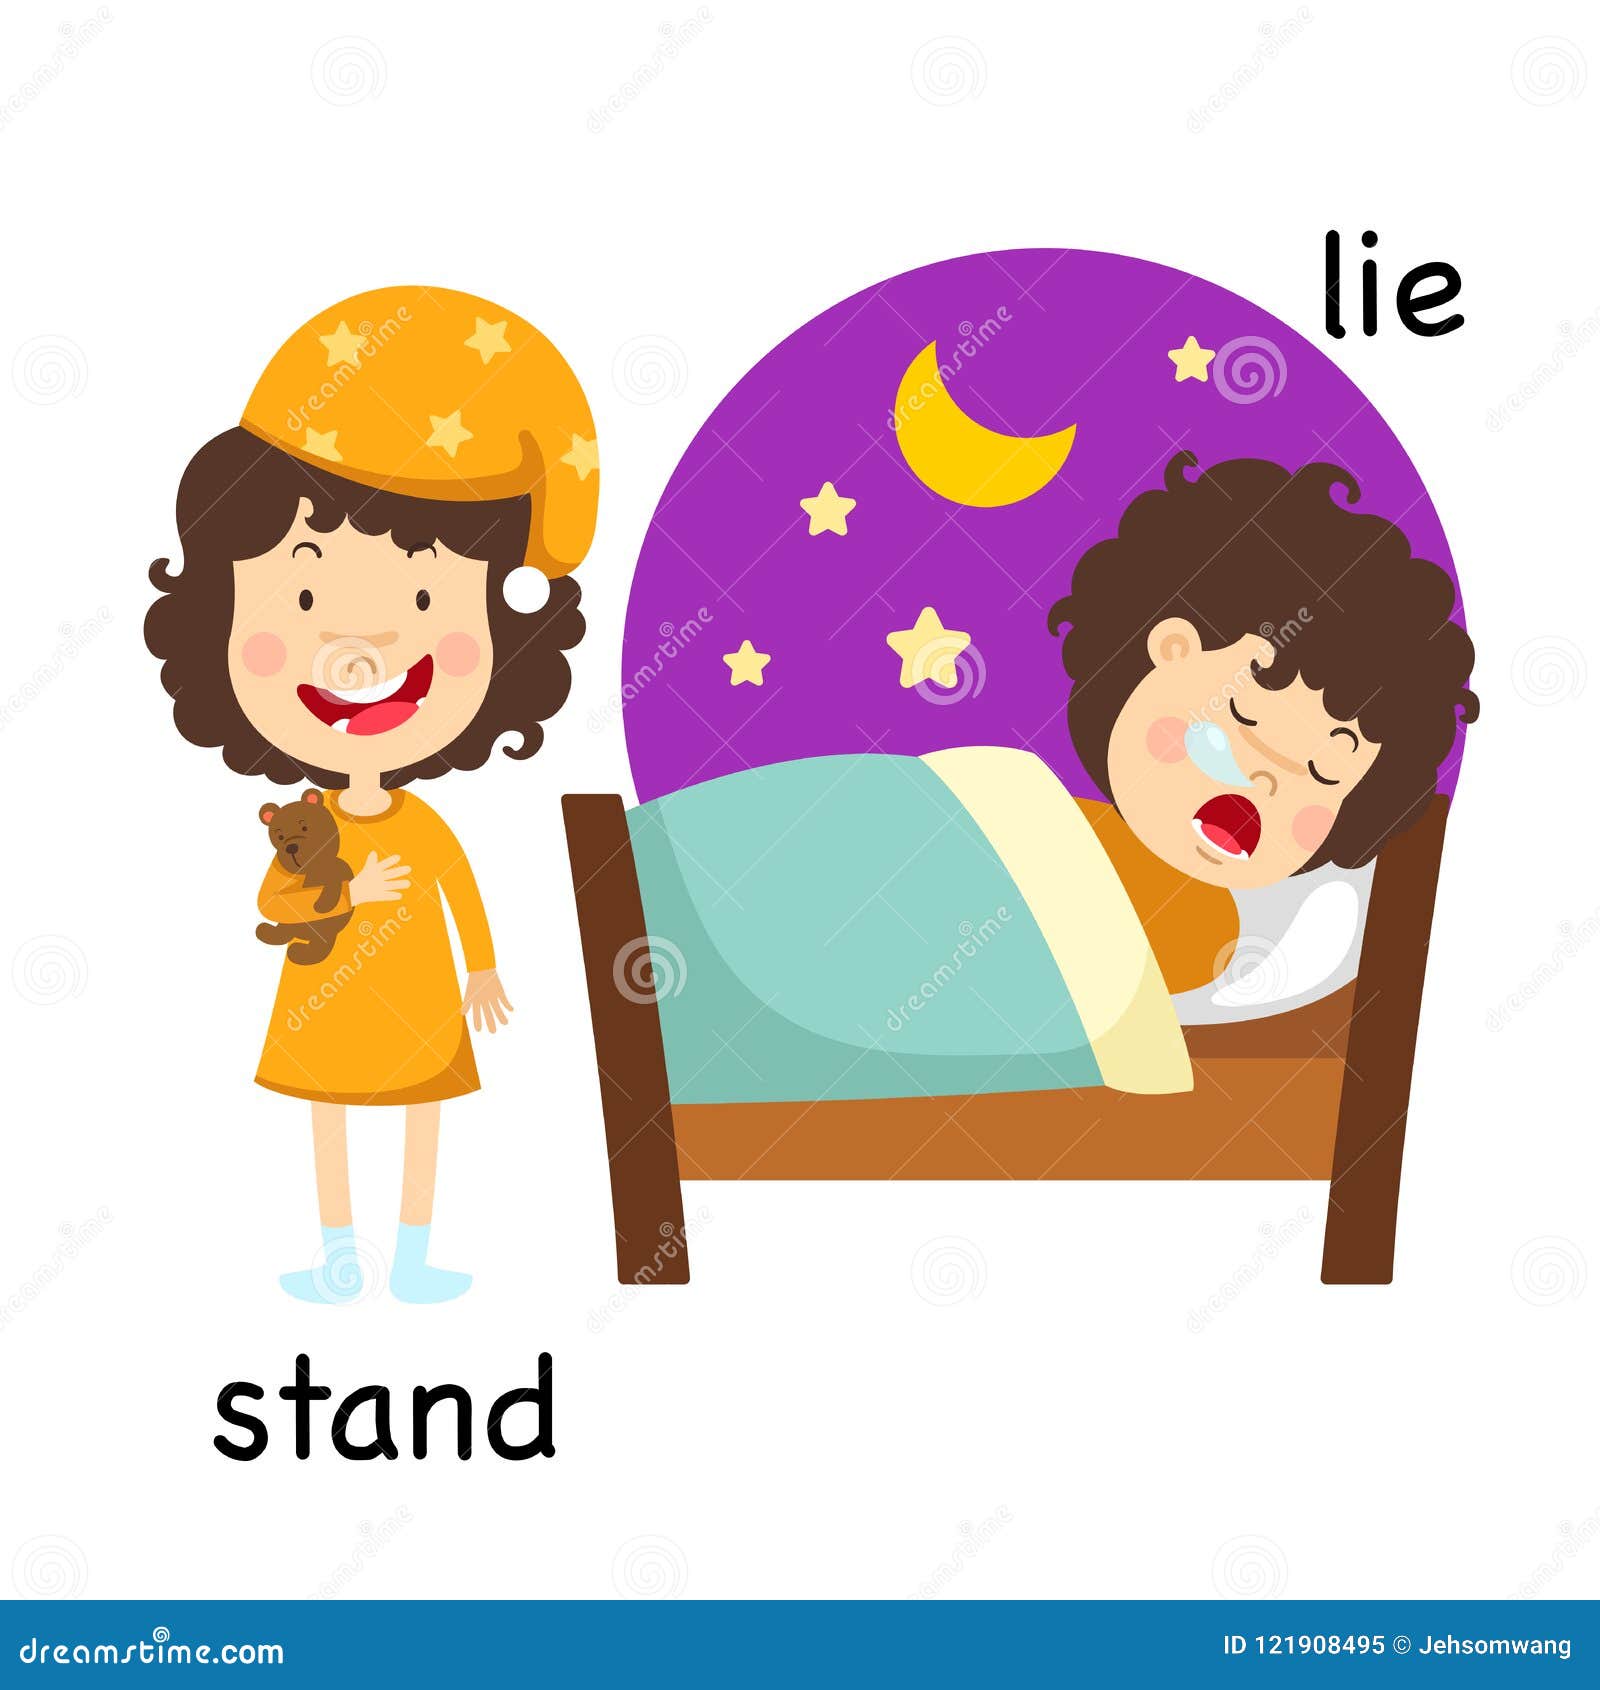 Opposite Stand And Lie Stock Vector Illustration Of Graphic 121908495